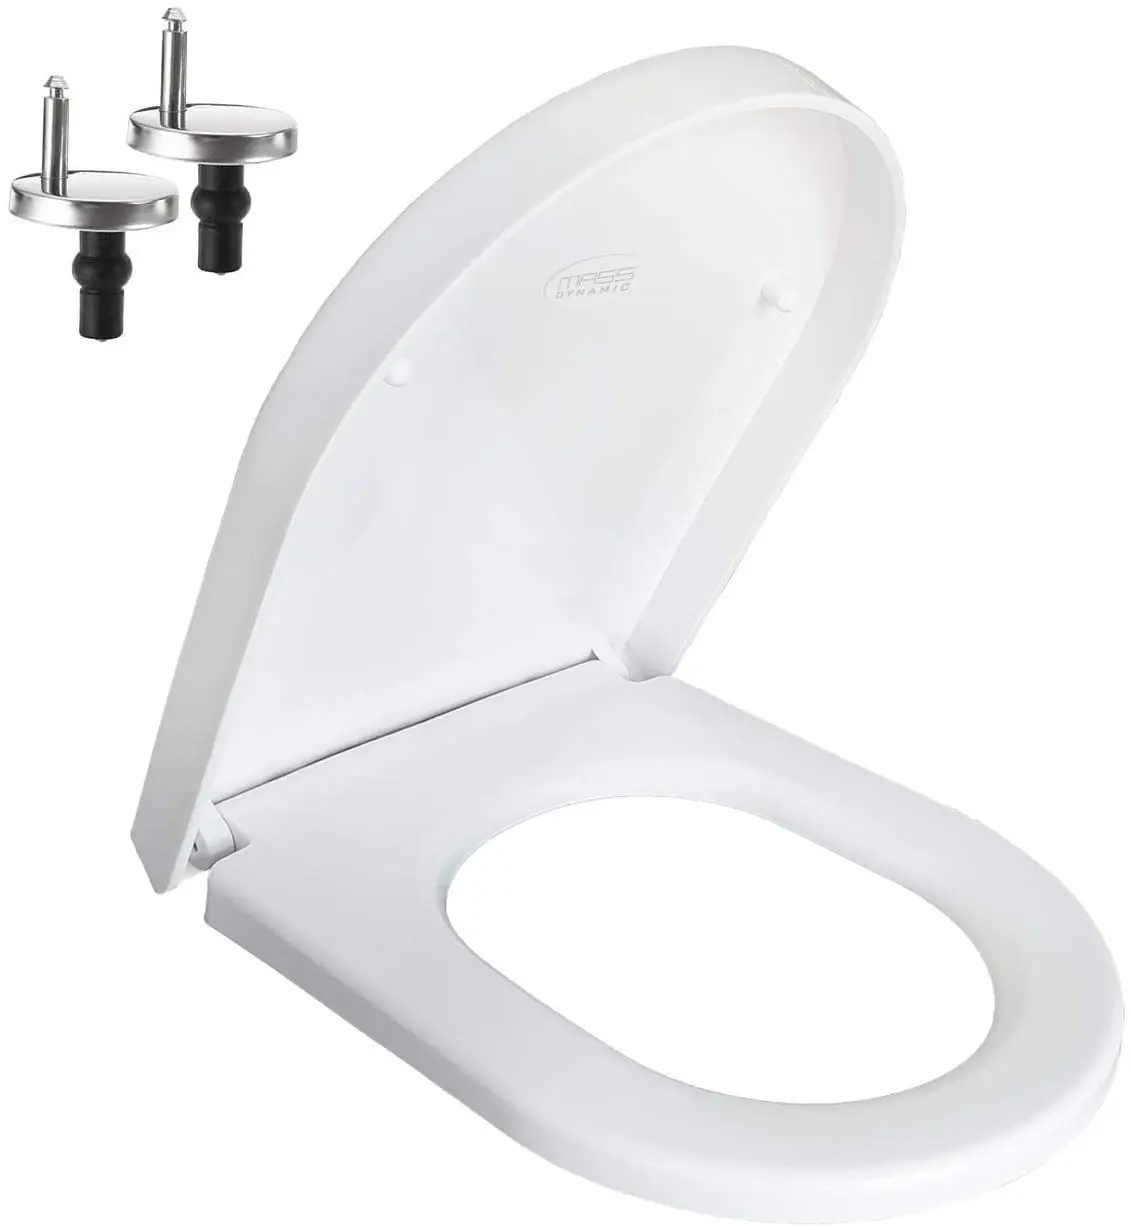 Luxury White D Shape Soft Close Toilet Seat With Top Fixing Hinges Heavy Duty for sale online 